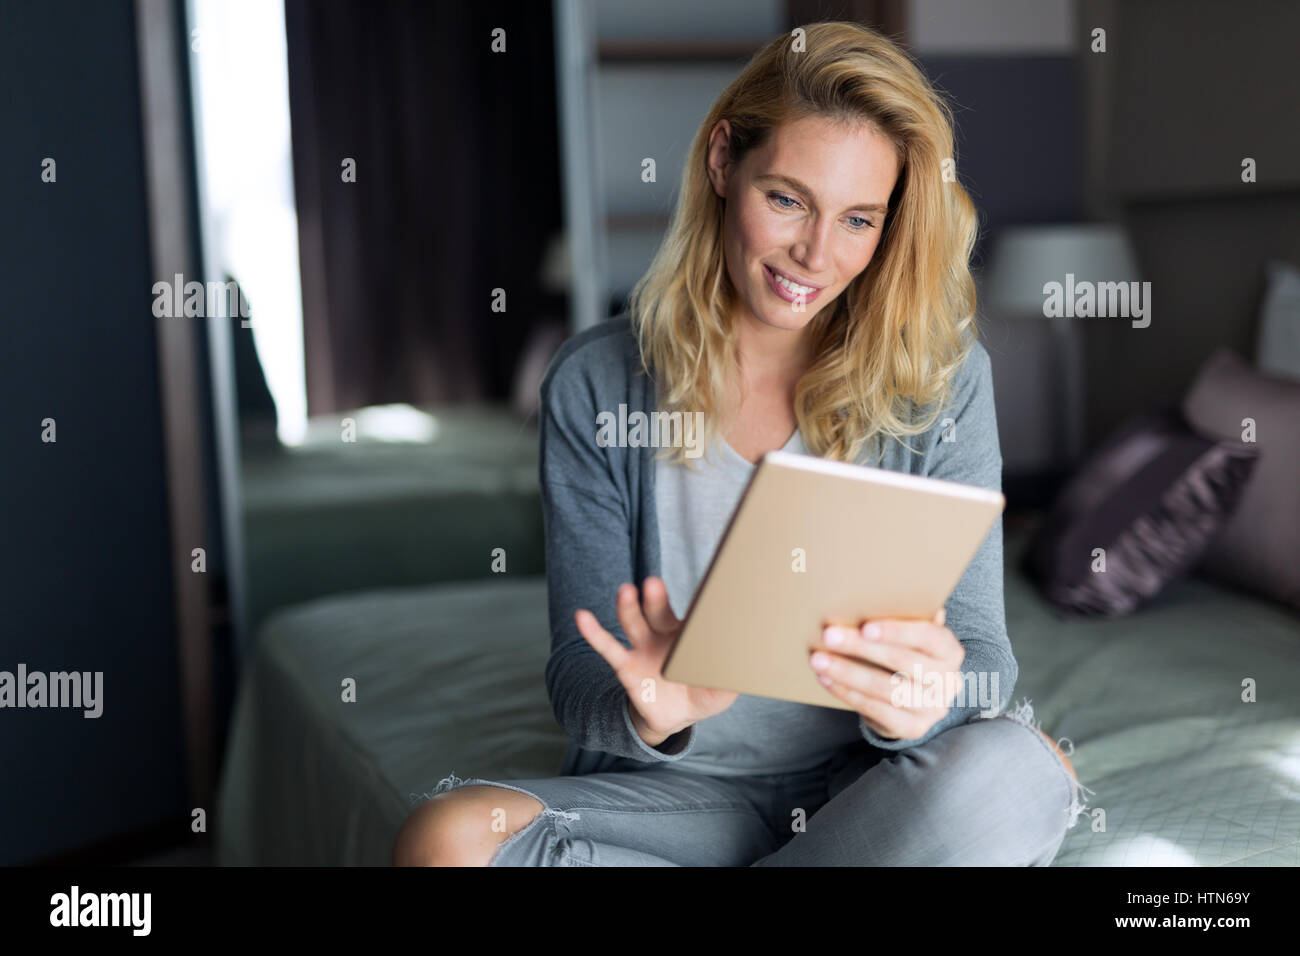 Belle blonde woman relaxing on bed abd using tablet Banque D'Images